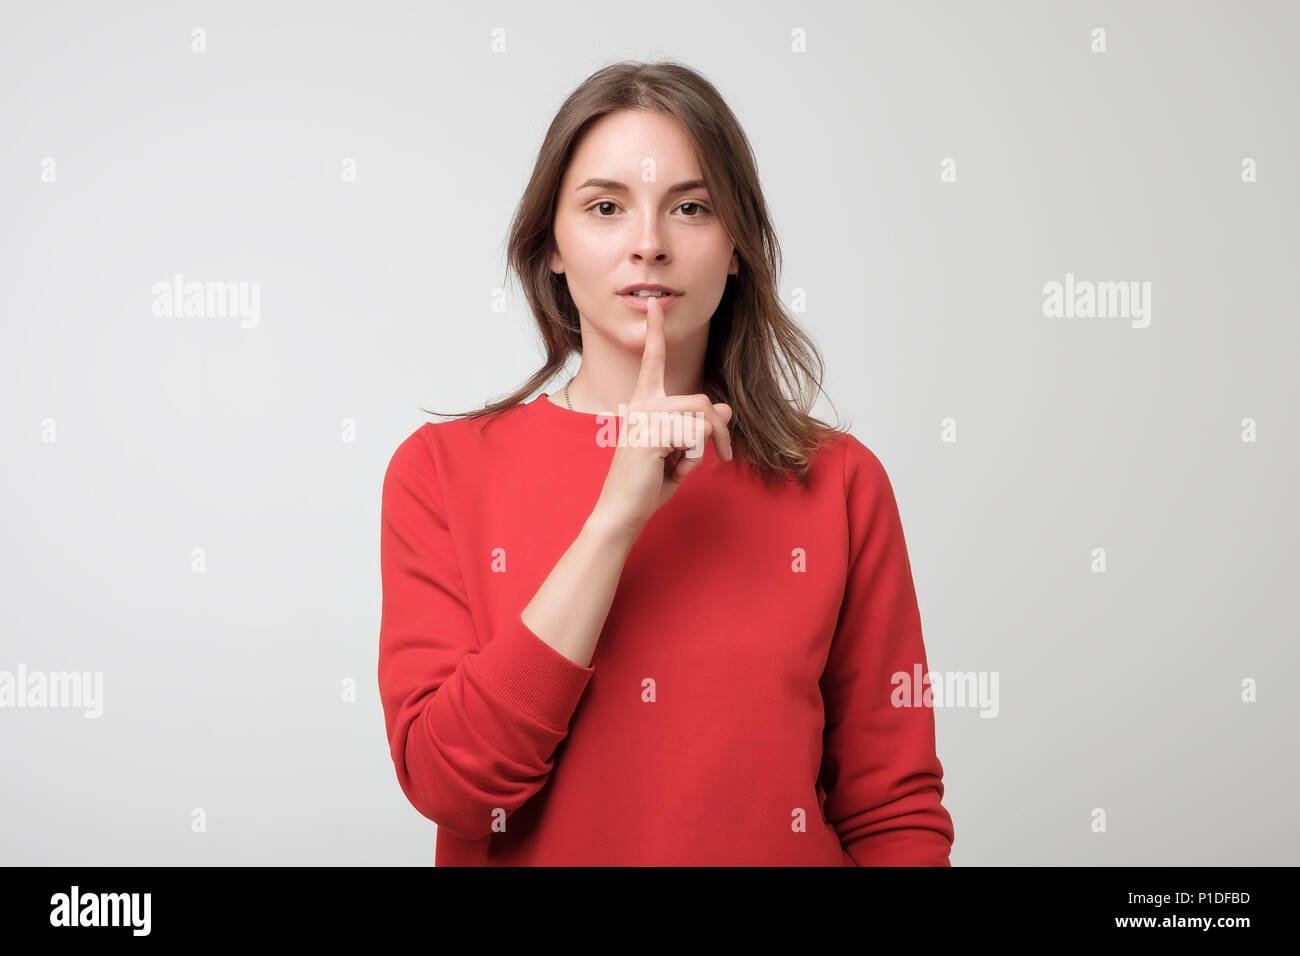 Beautiful european woman in red pulover showing silence sign Stock Photo